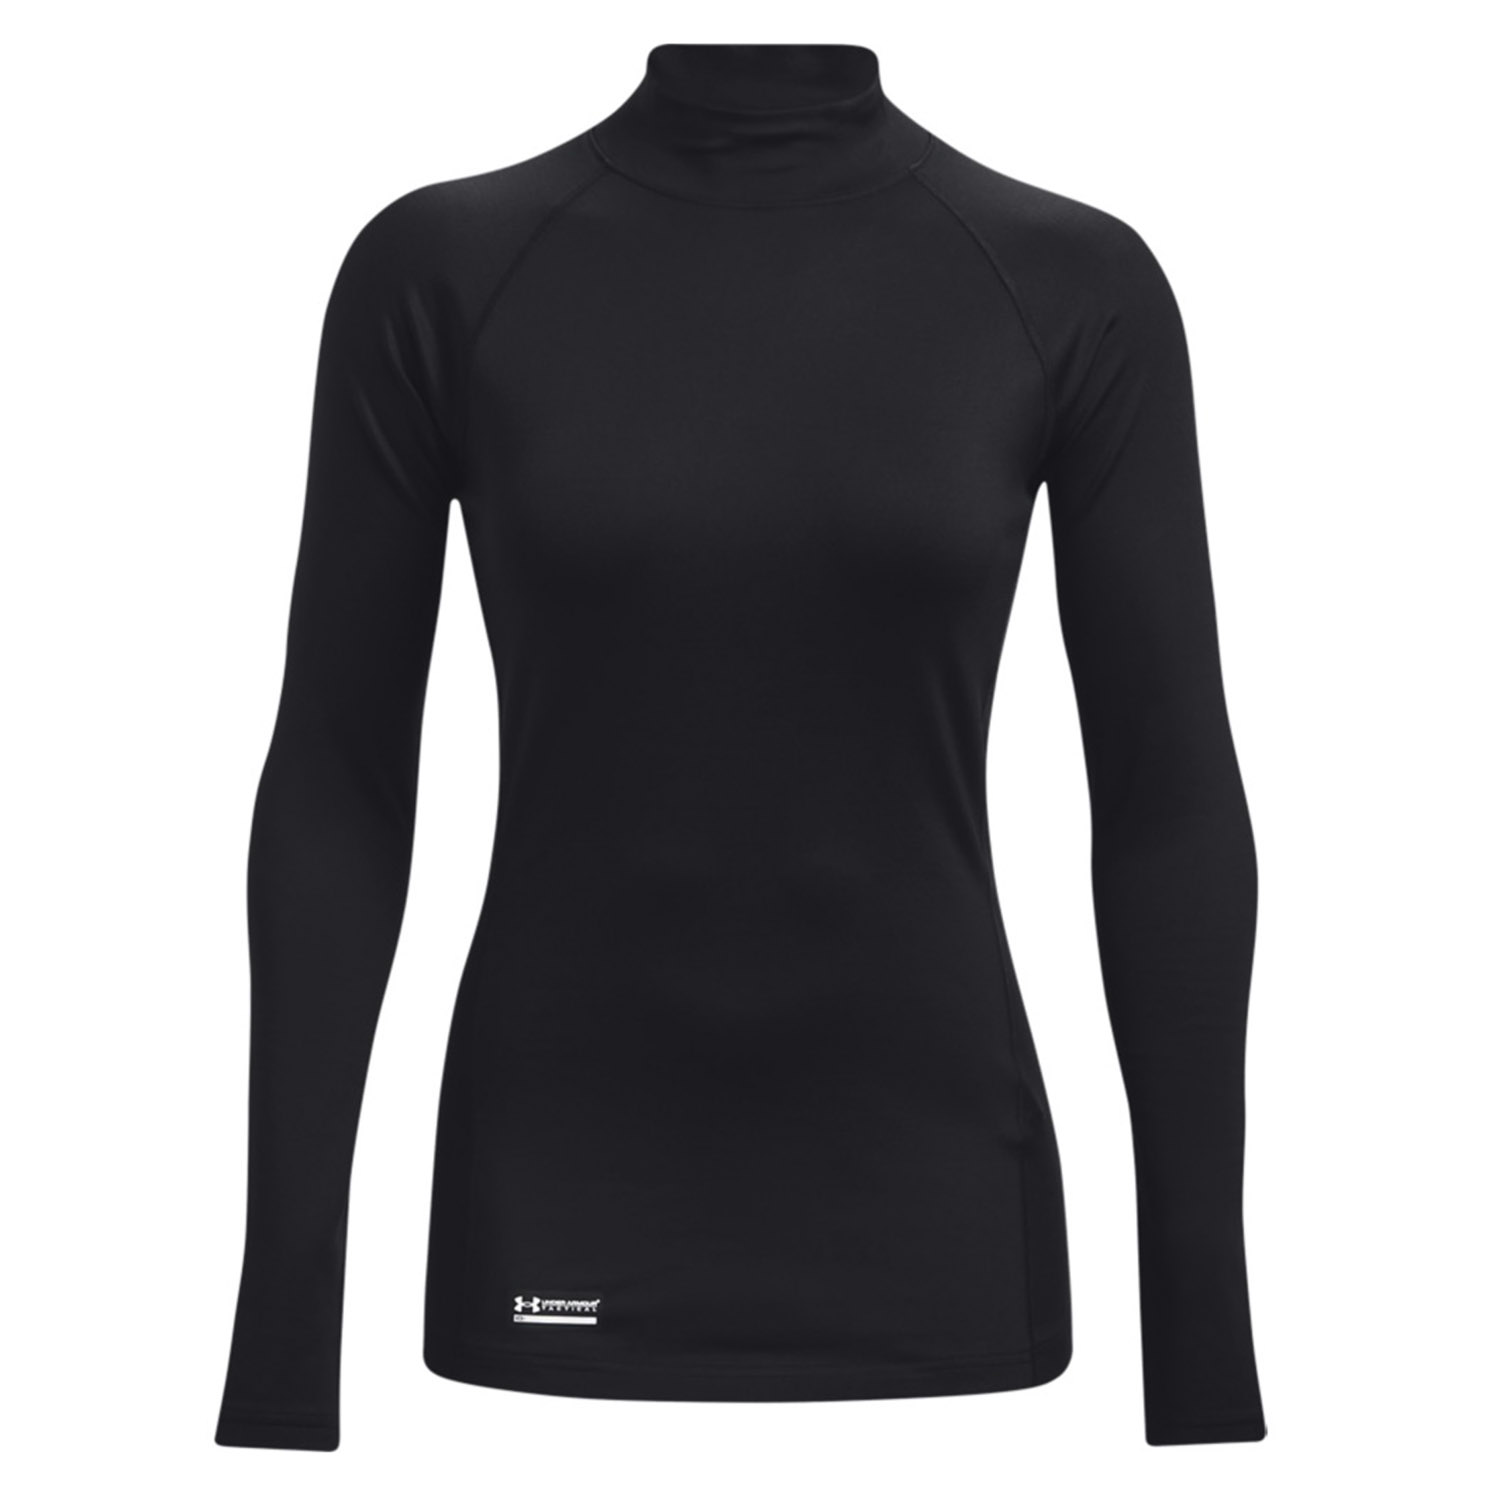 Under Armour Women's Tactical CGI Mock Base Layer